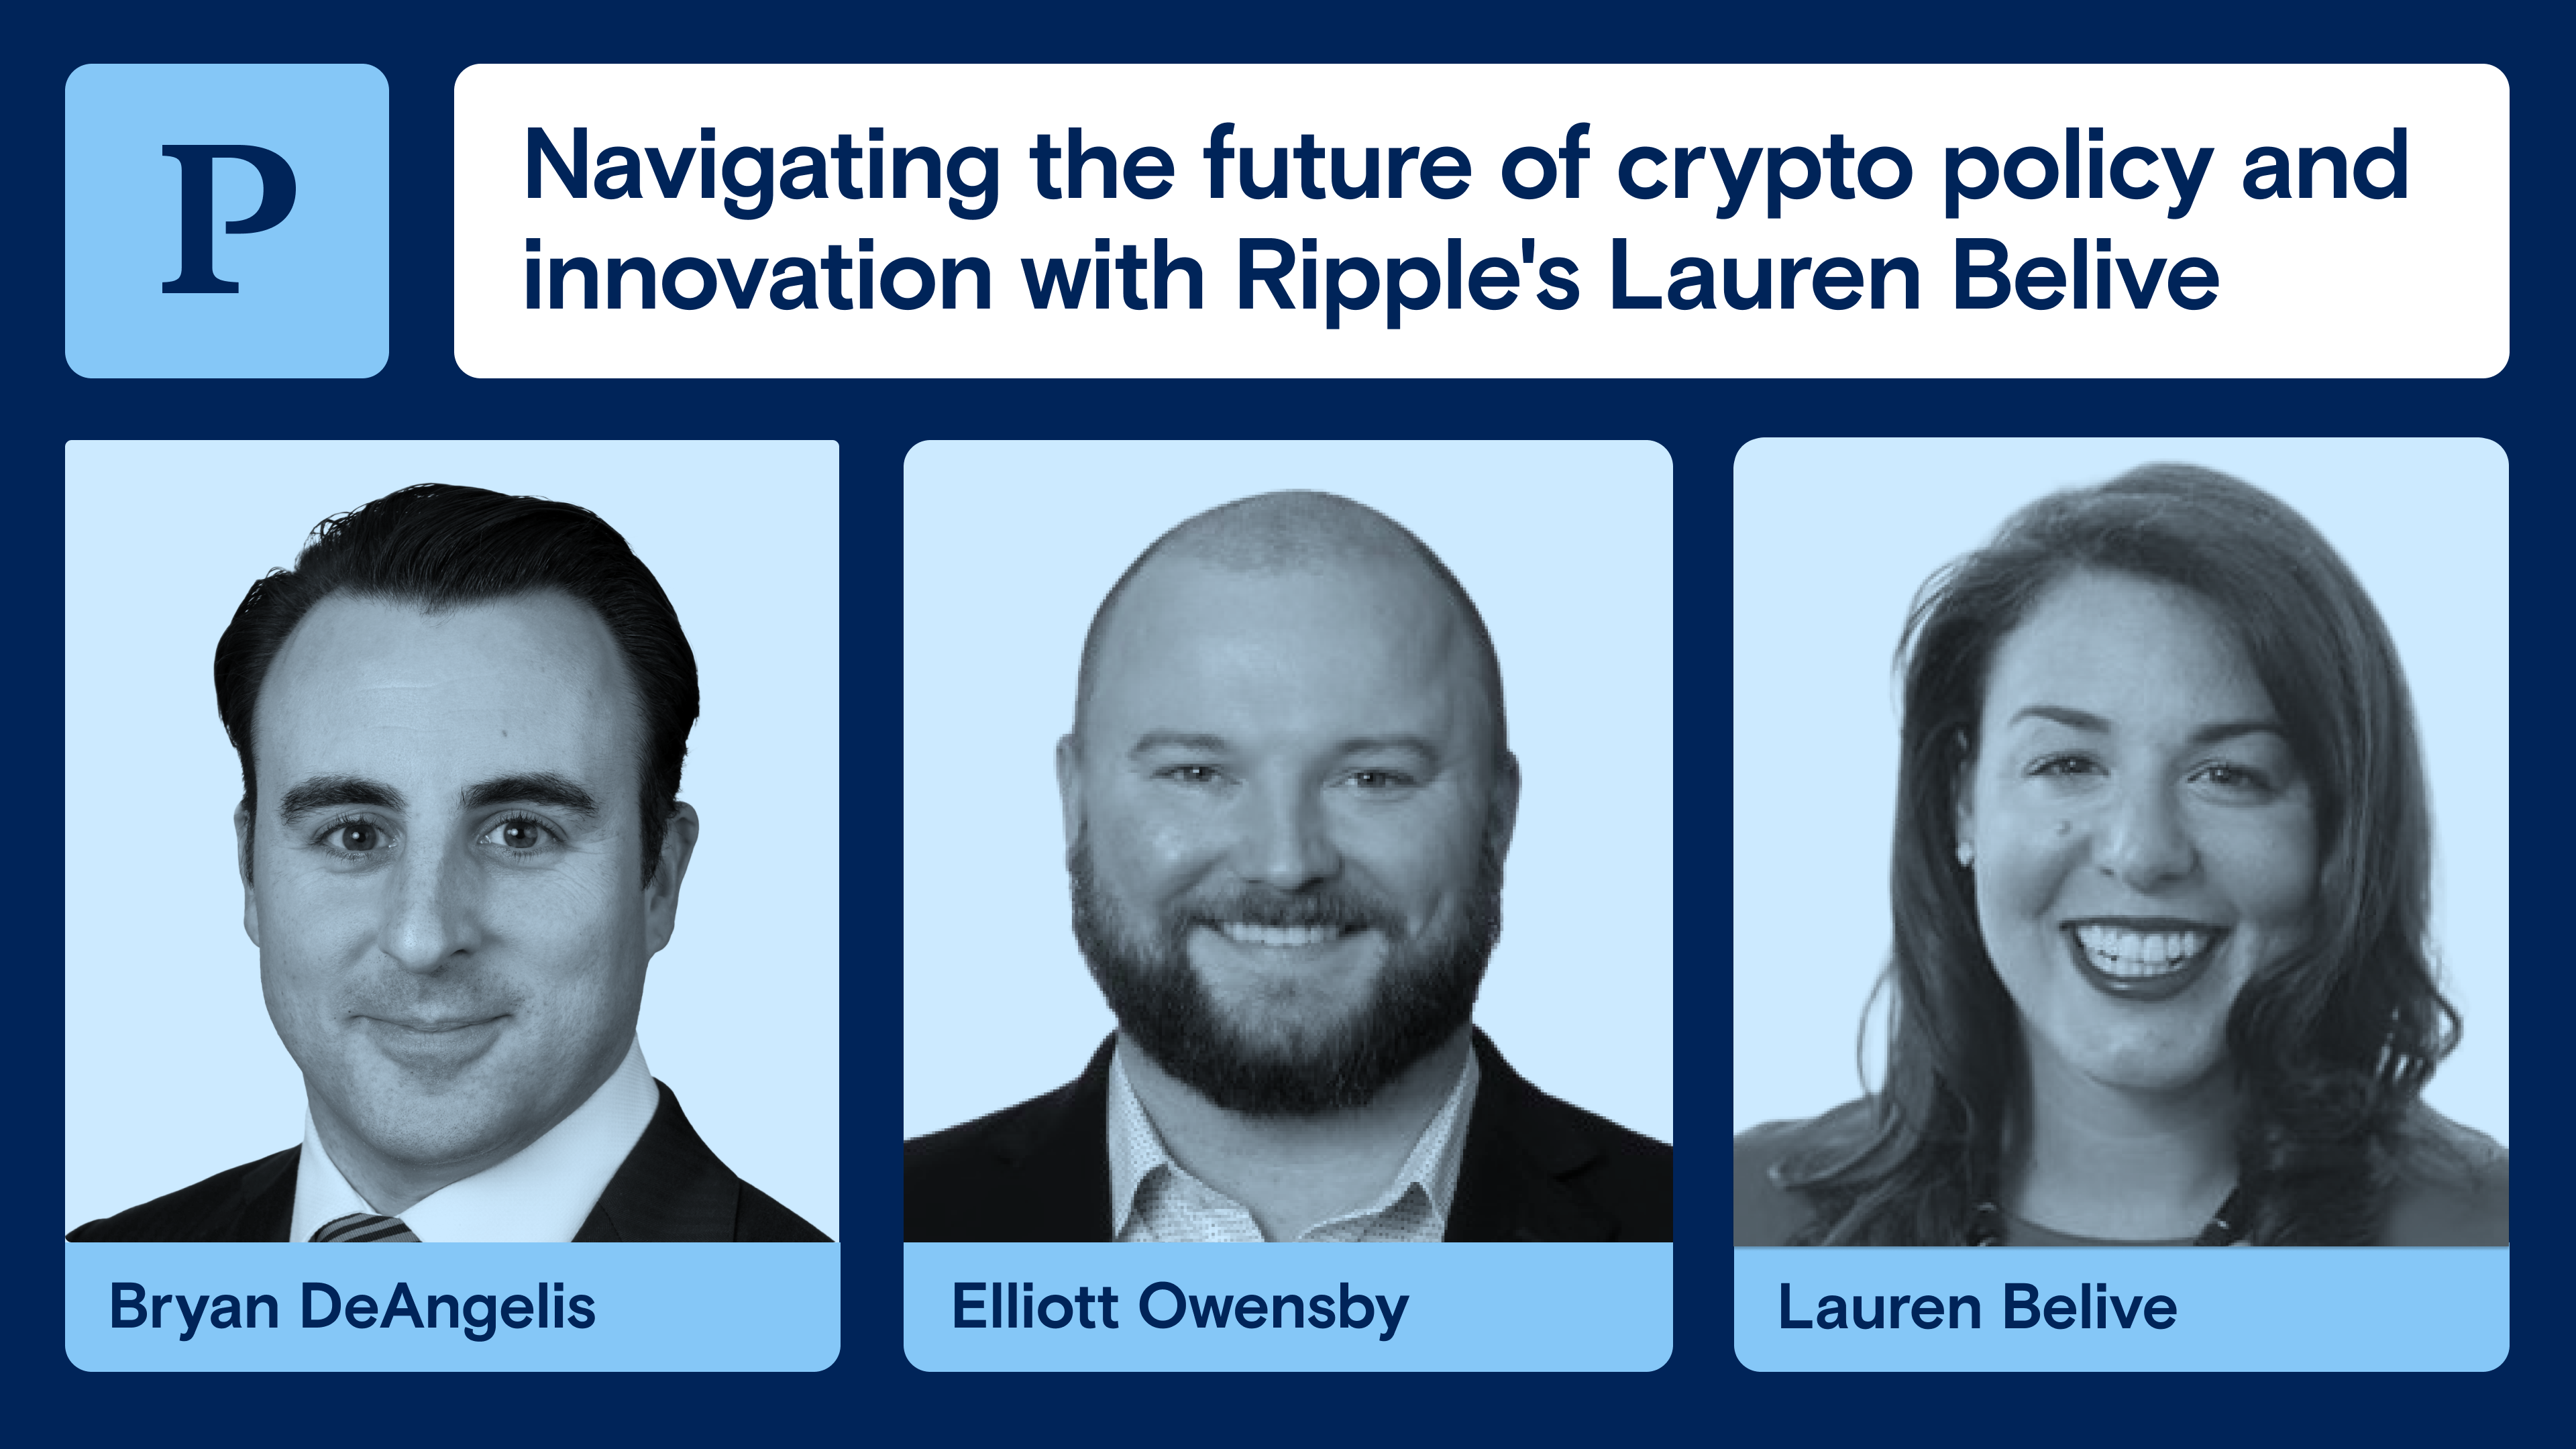 Navigating the future of crypto policy and innovation with Ripple's Lauren Belive